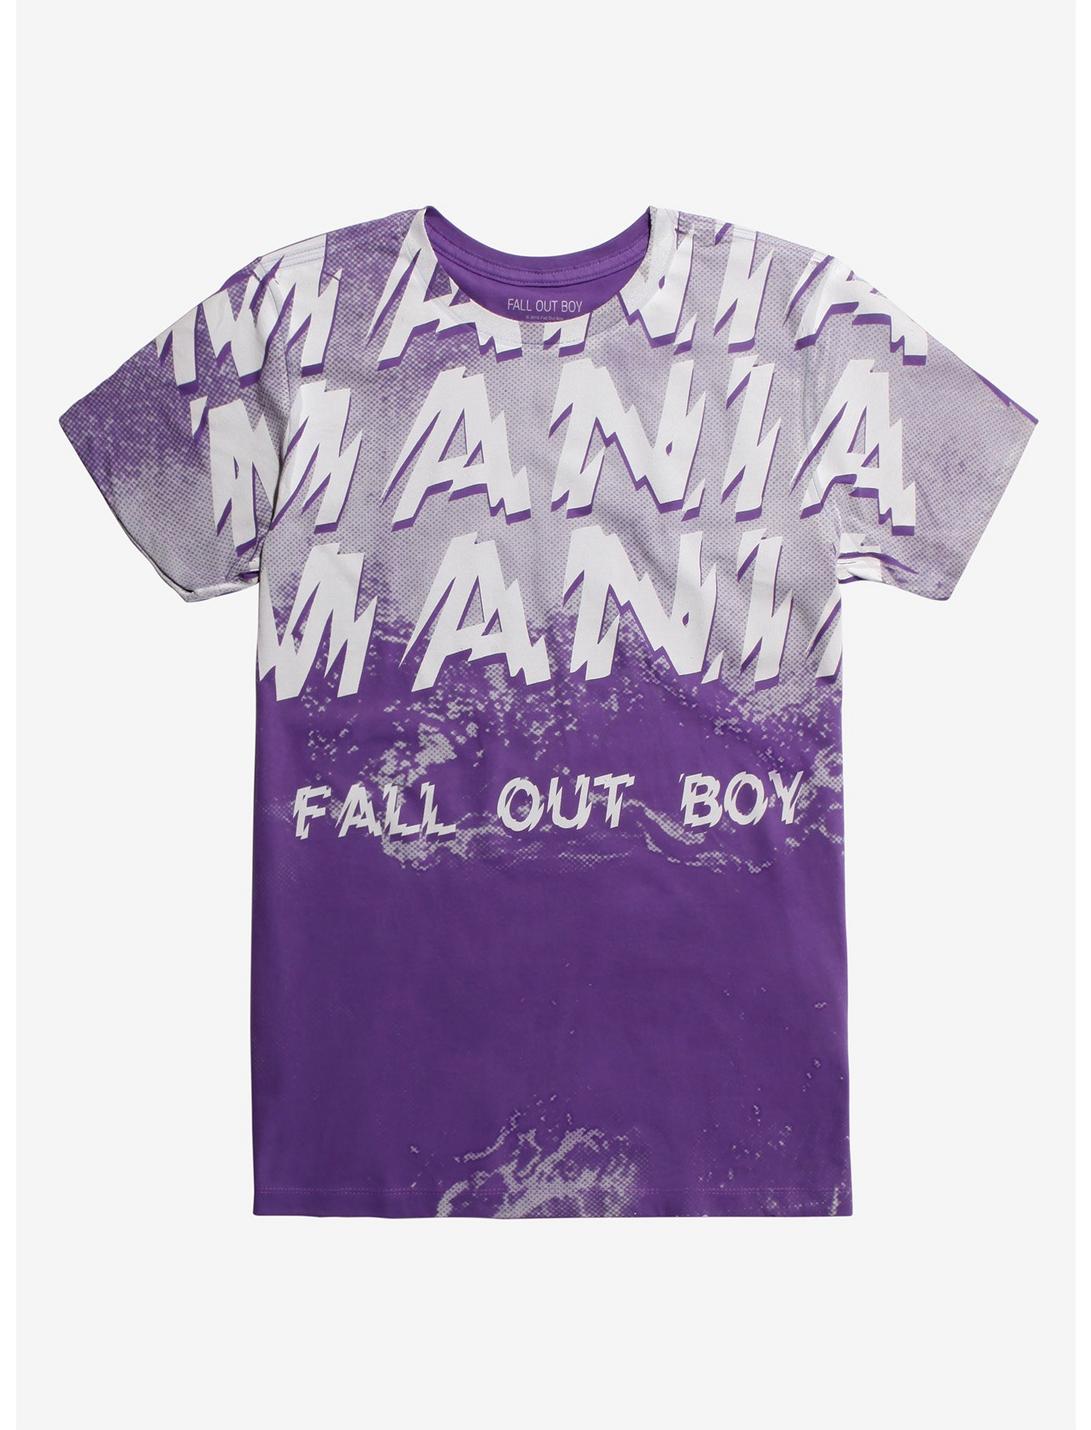 Fall Out Boy M A N I A Pop Art T-Shirt, PURPLE, hi-res